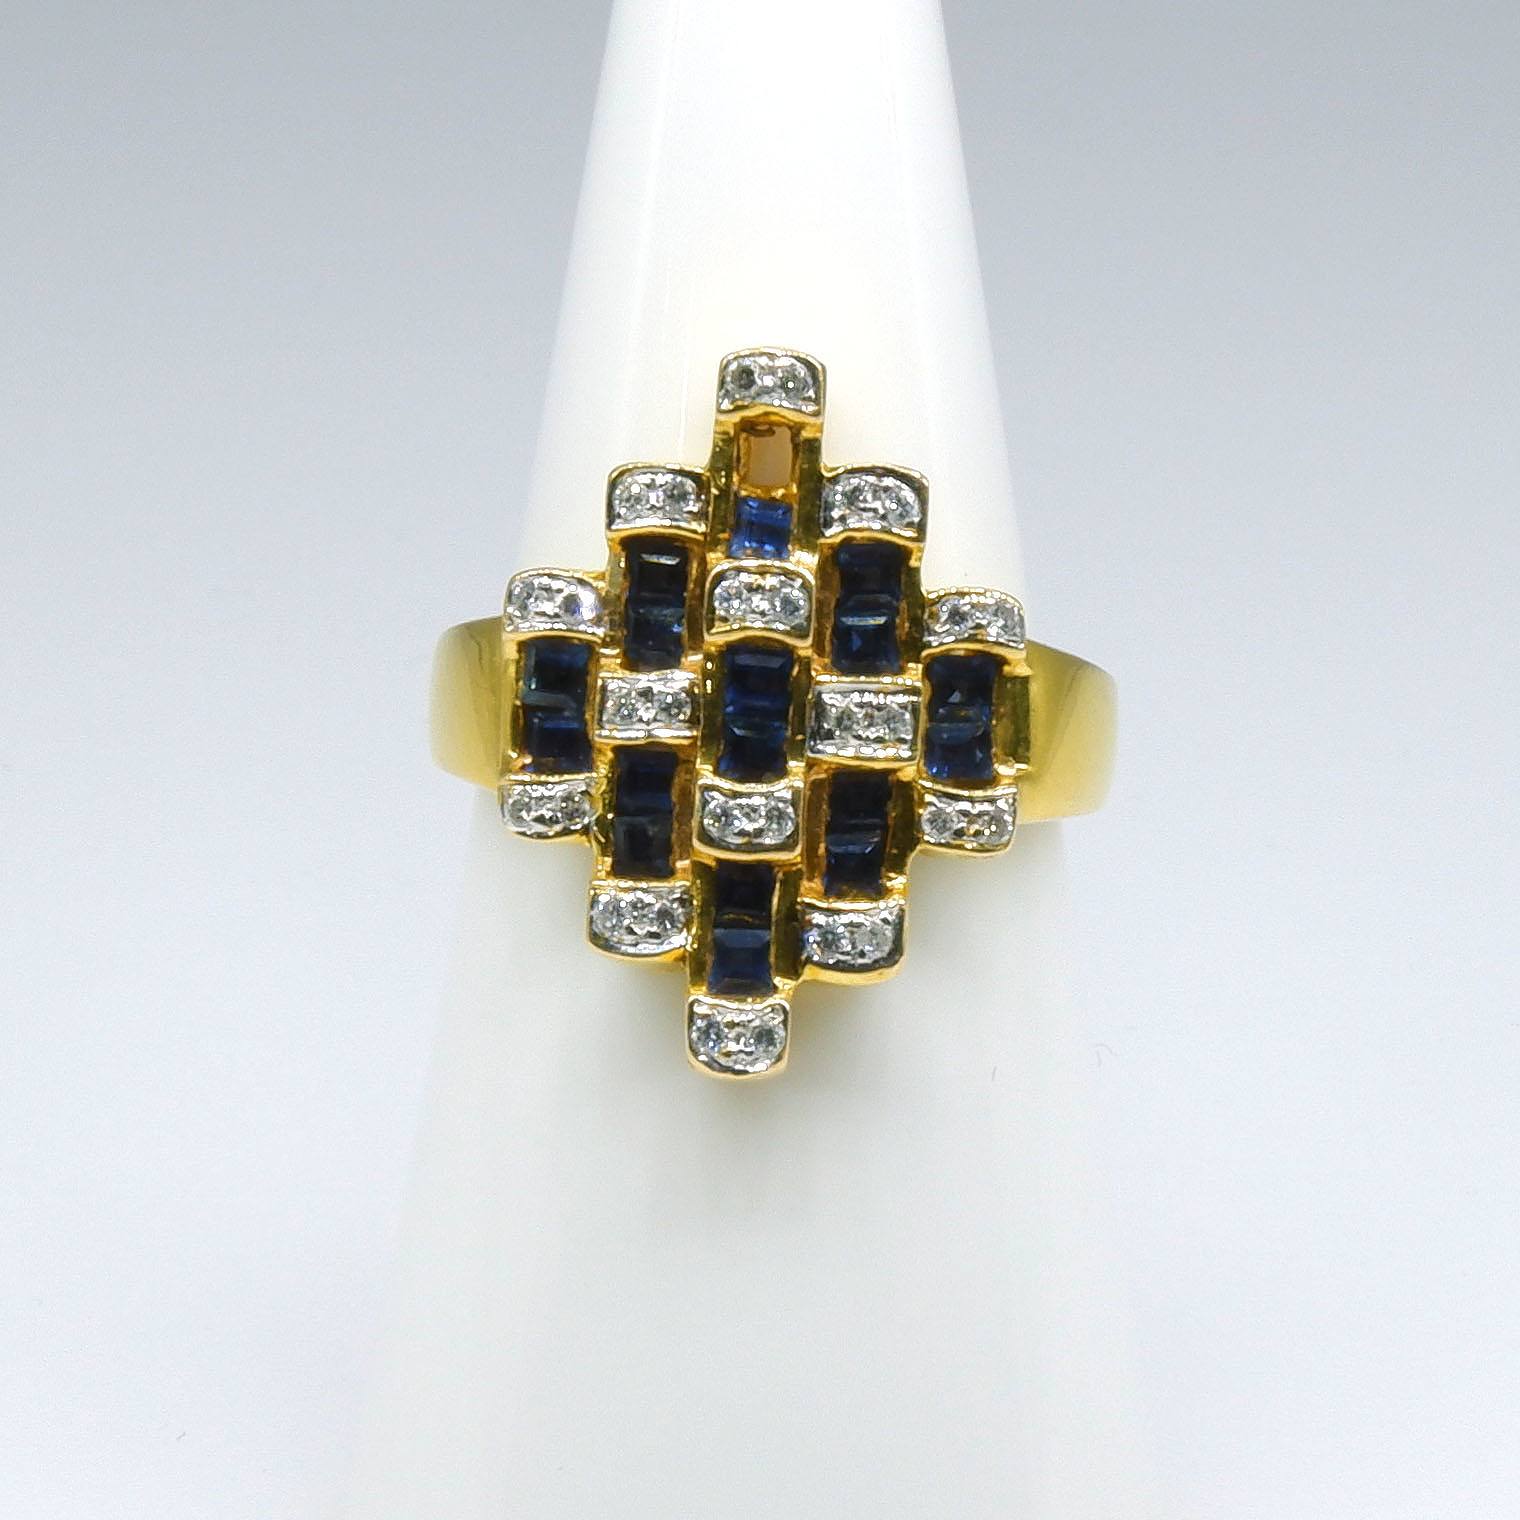 '18ct Yellow Gold Ring with Seventeen Carre Cut Sapphires and Twenty Eight Round Brilliant Cut Diamonds in Bars in Pairs'